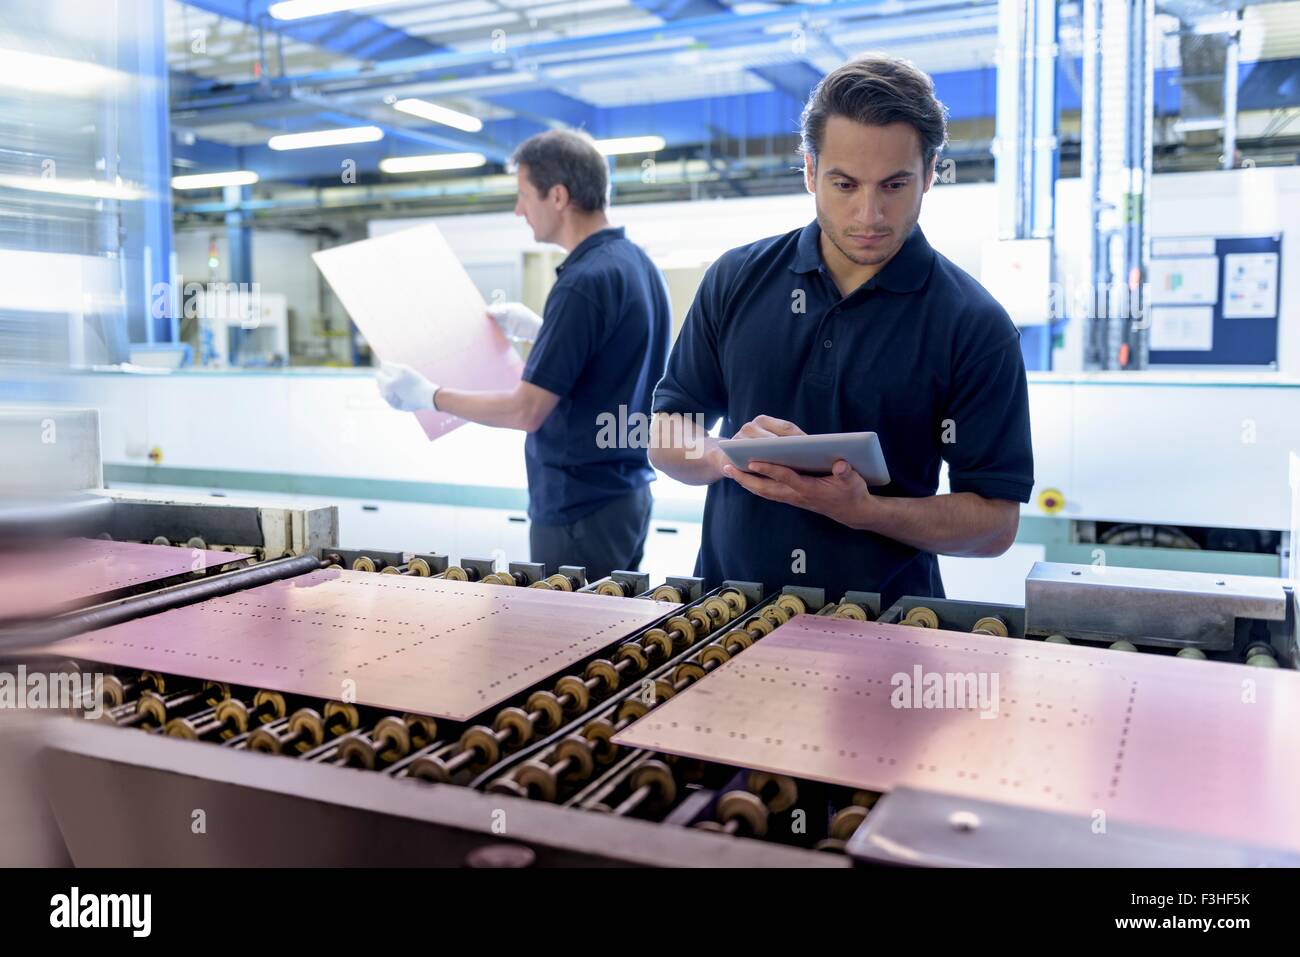 Workers inspecting circuit board during manufacture in circuit board factory Stock Photo